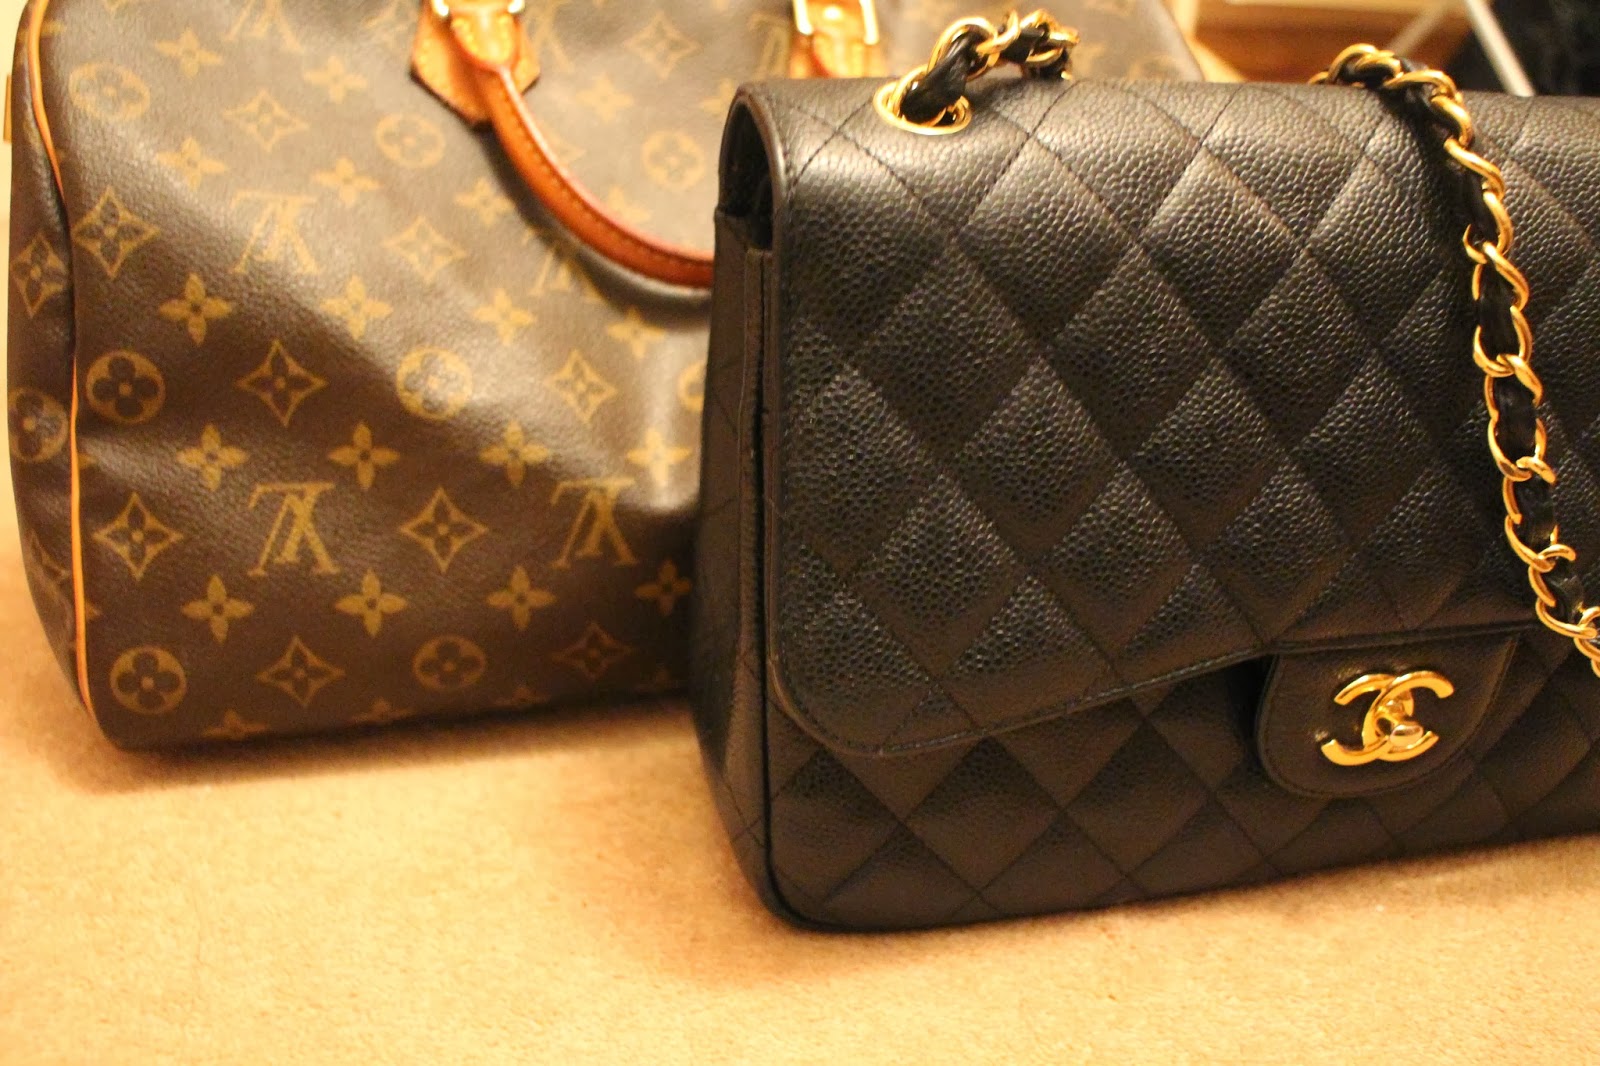 Luxe and Low : Chanel vs. Louis Vuitton